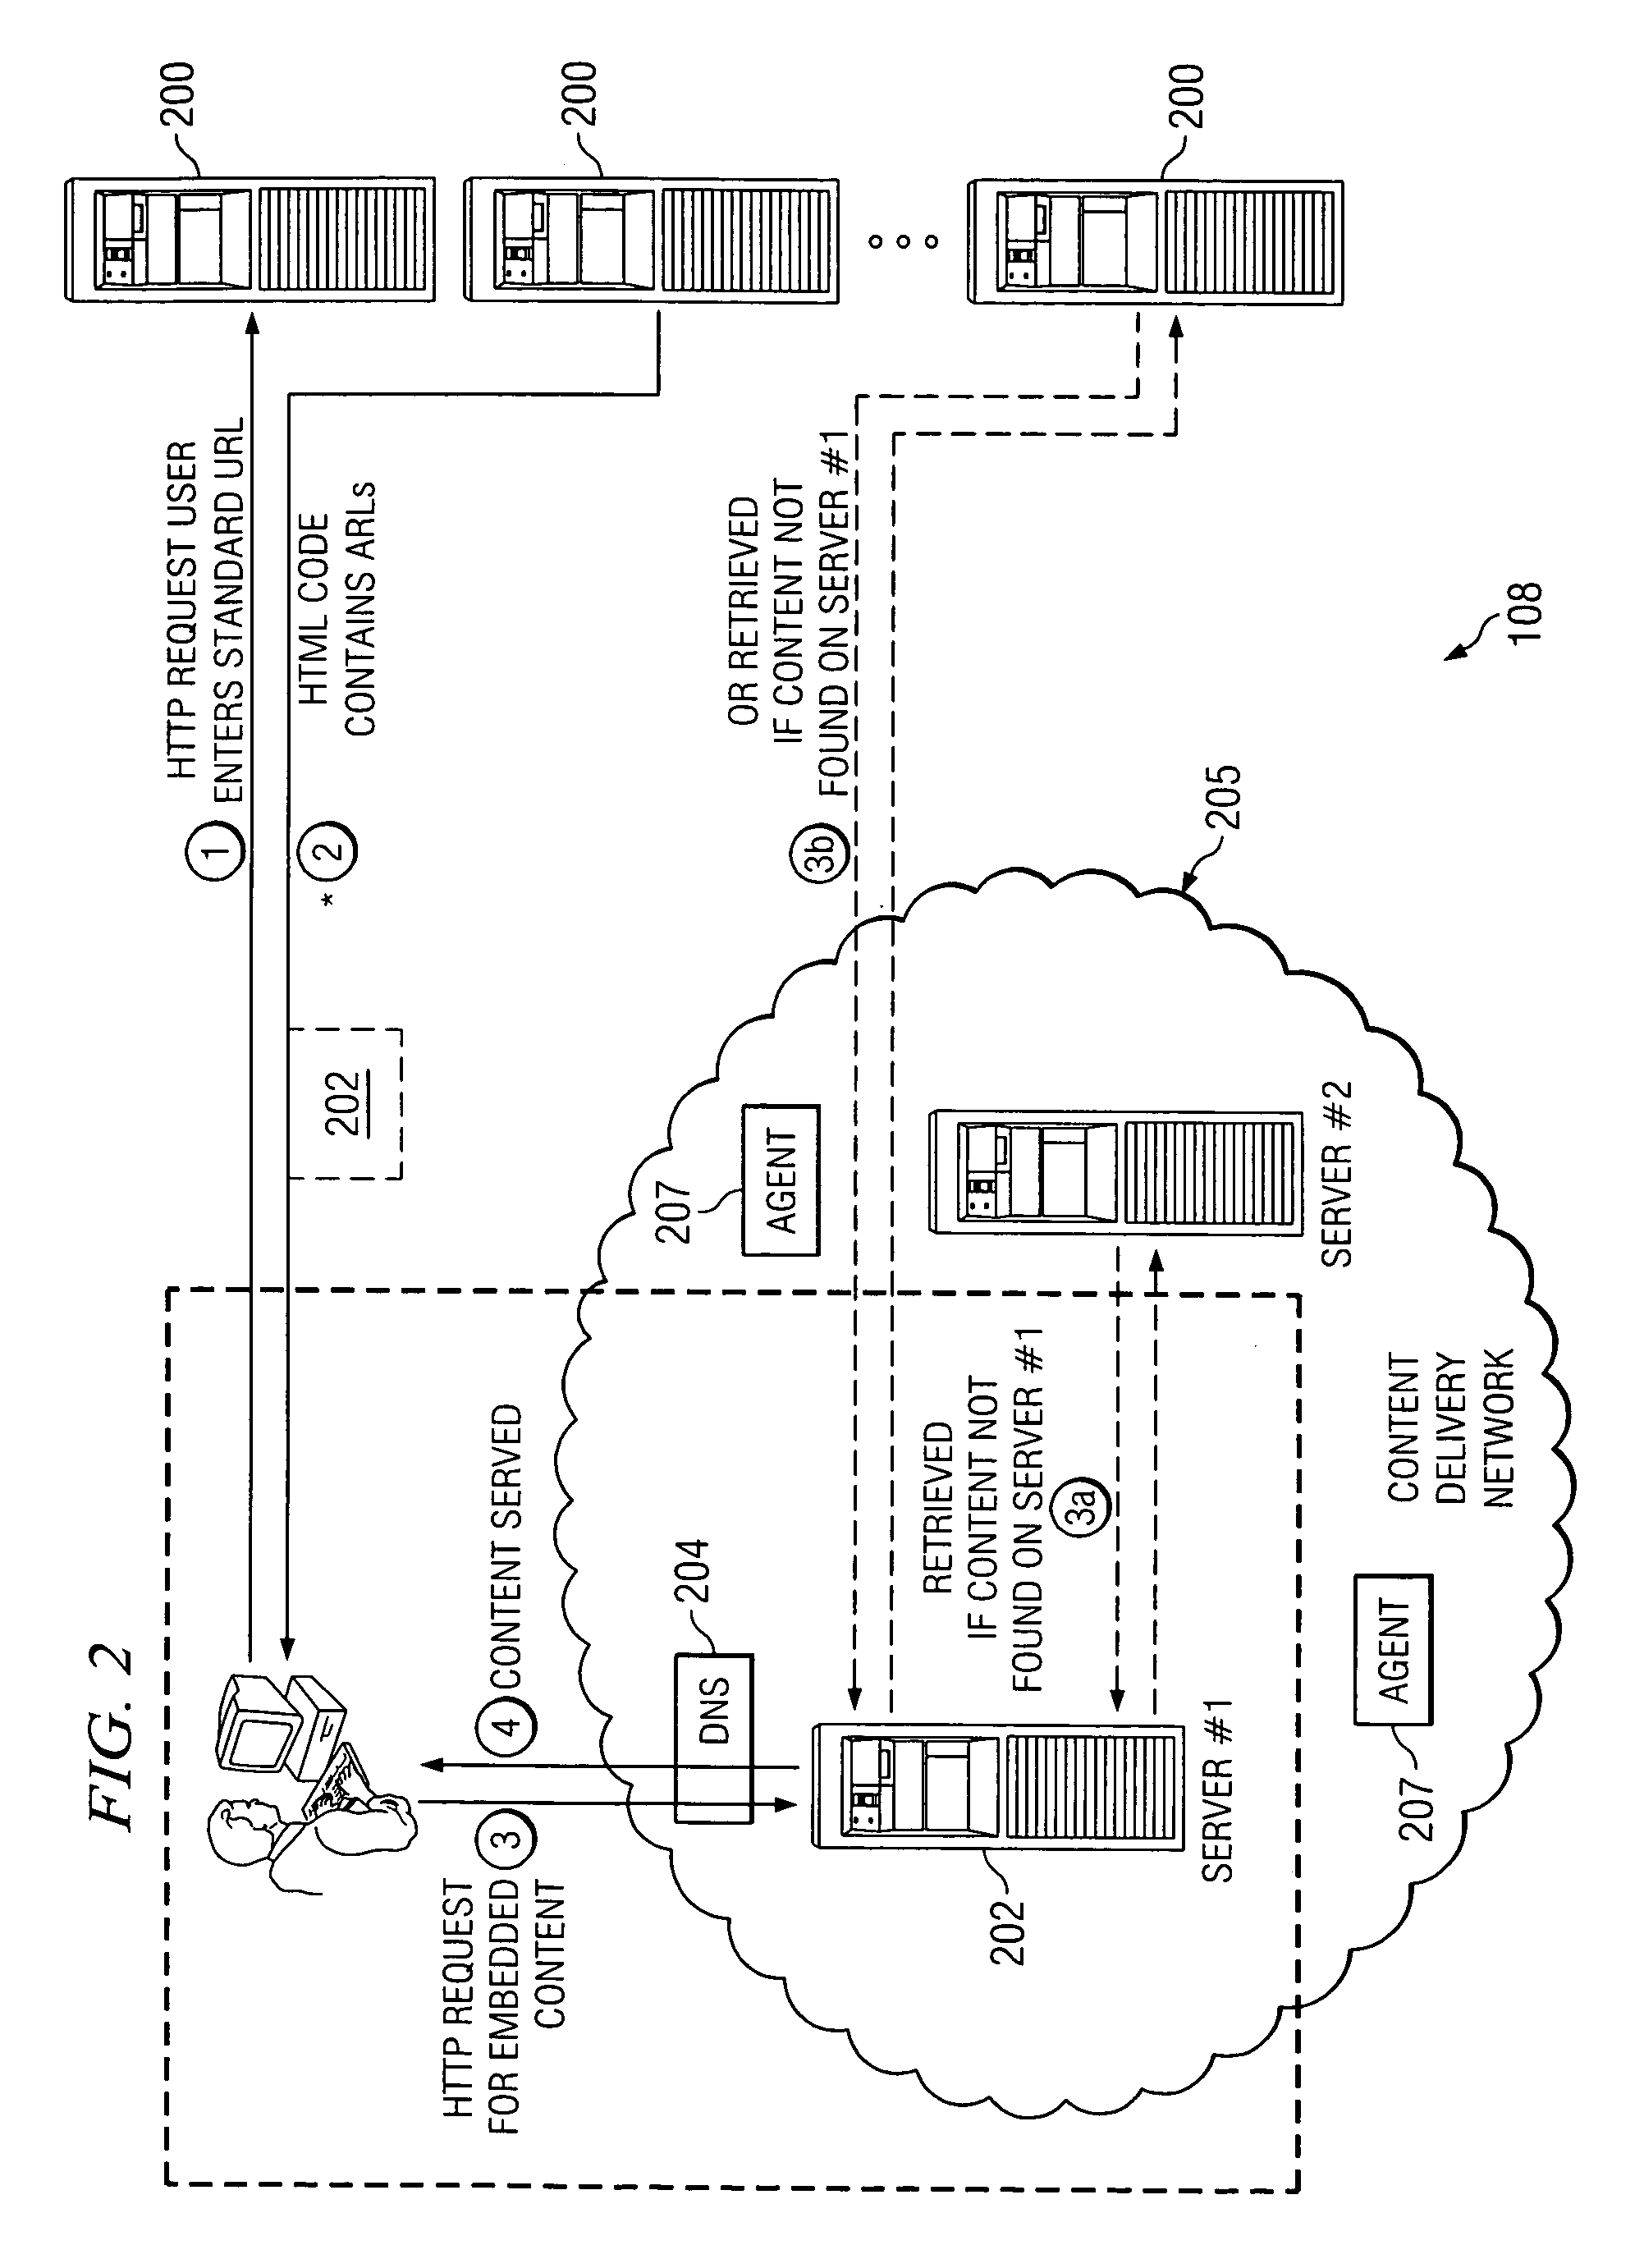 Method and system for purging content from a content delivery network